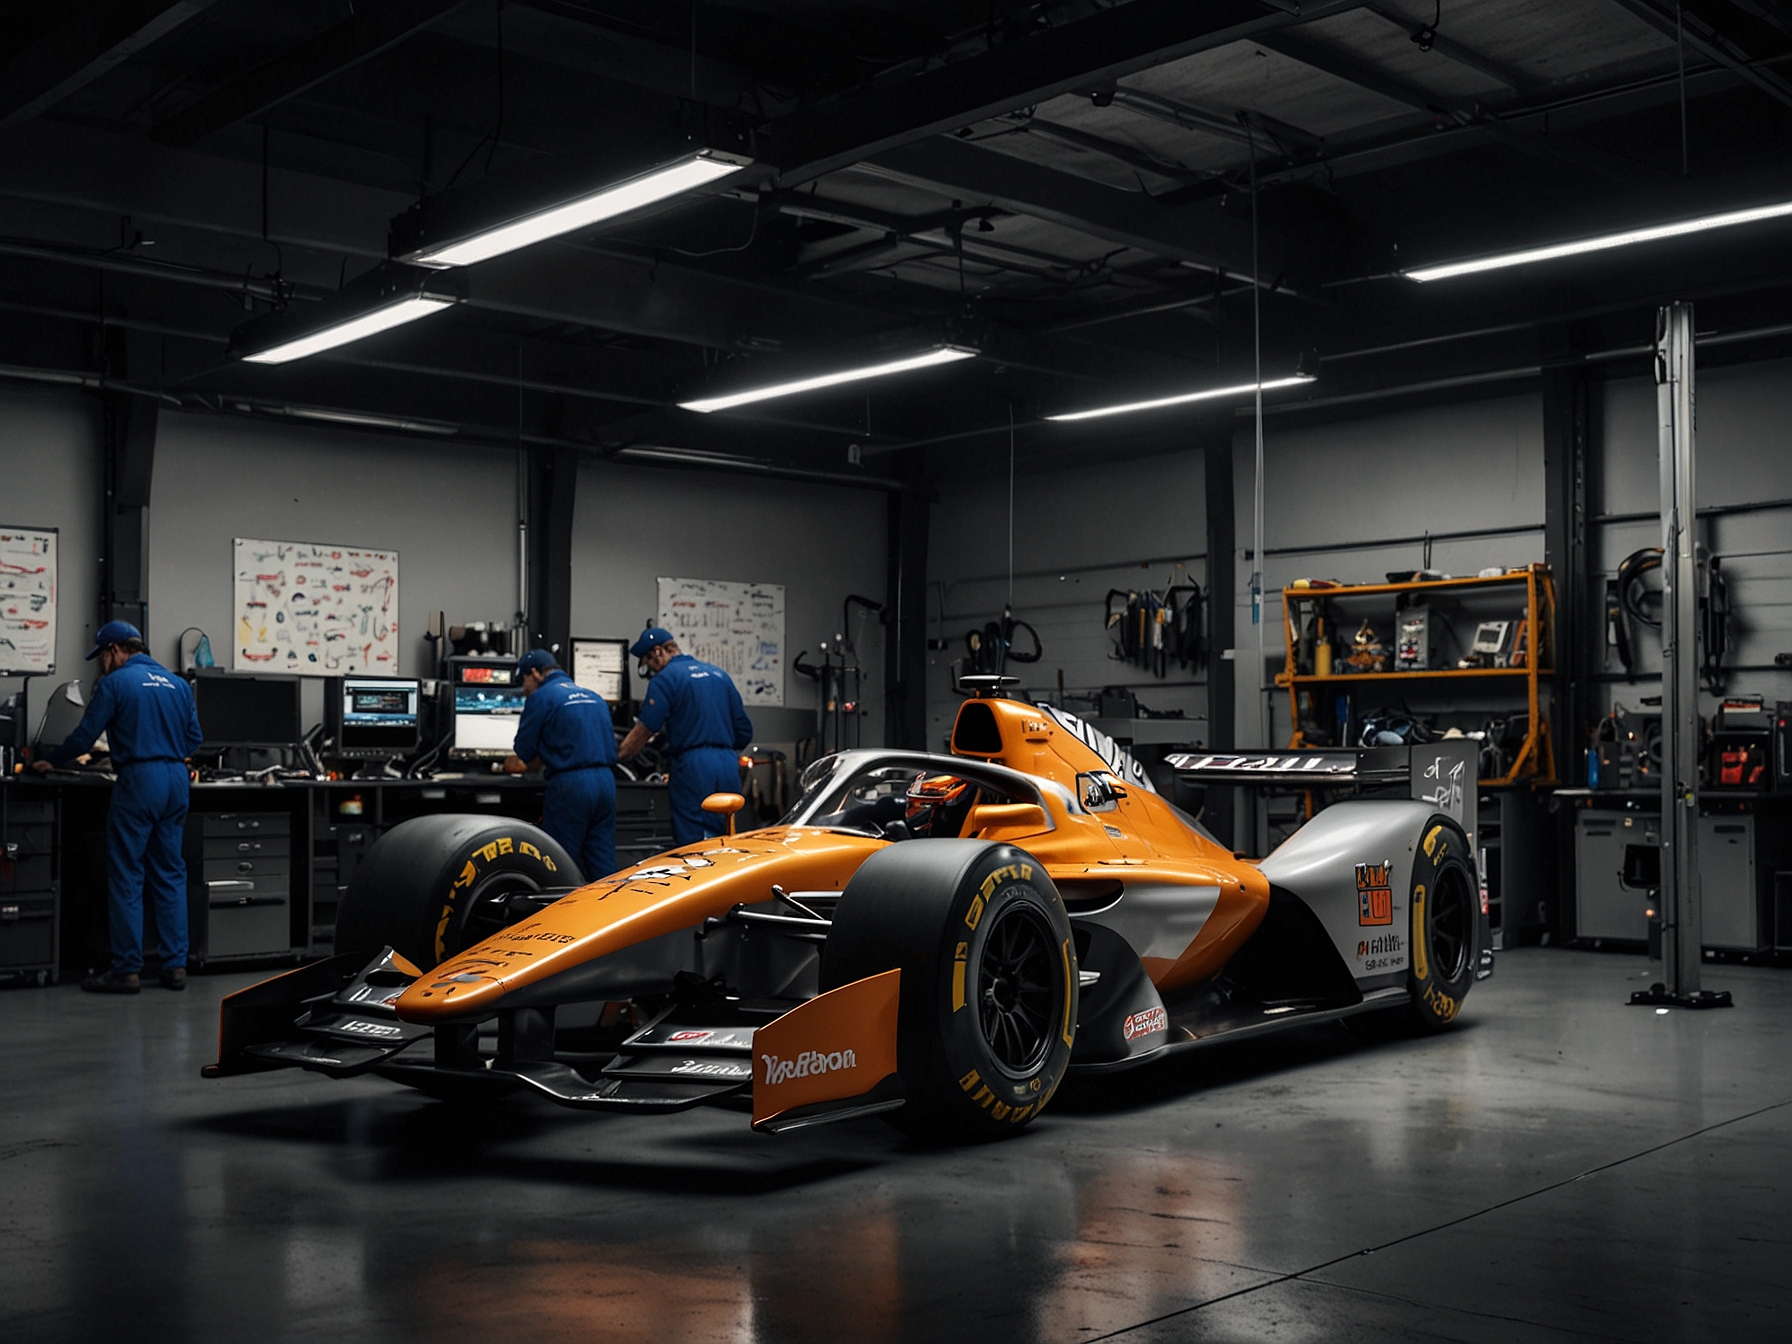 Engineers from both Meyer Shank Racing and Andretti Global collaborate in a high-tech garage, surrounded by simulation tools and advanced data analytics screens, highlighting their technical partnership.